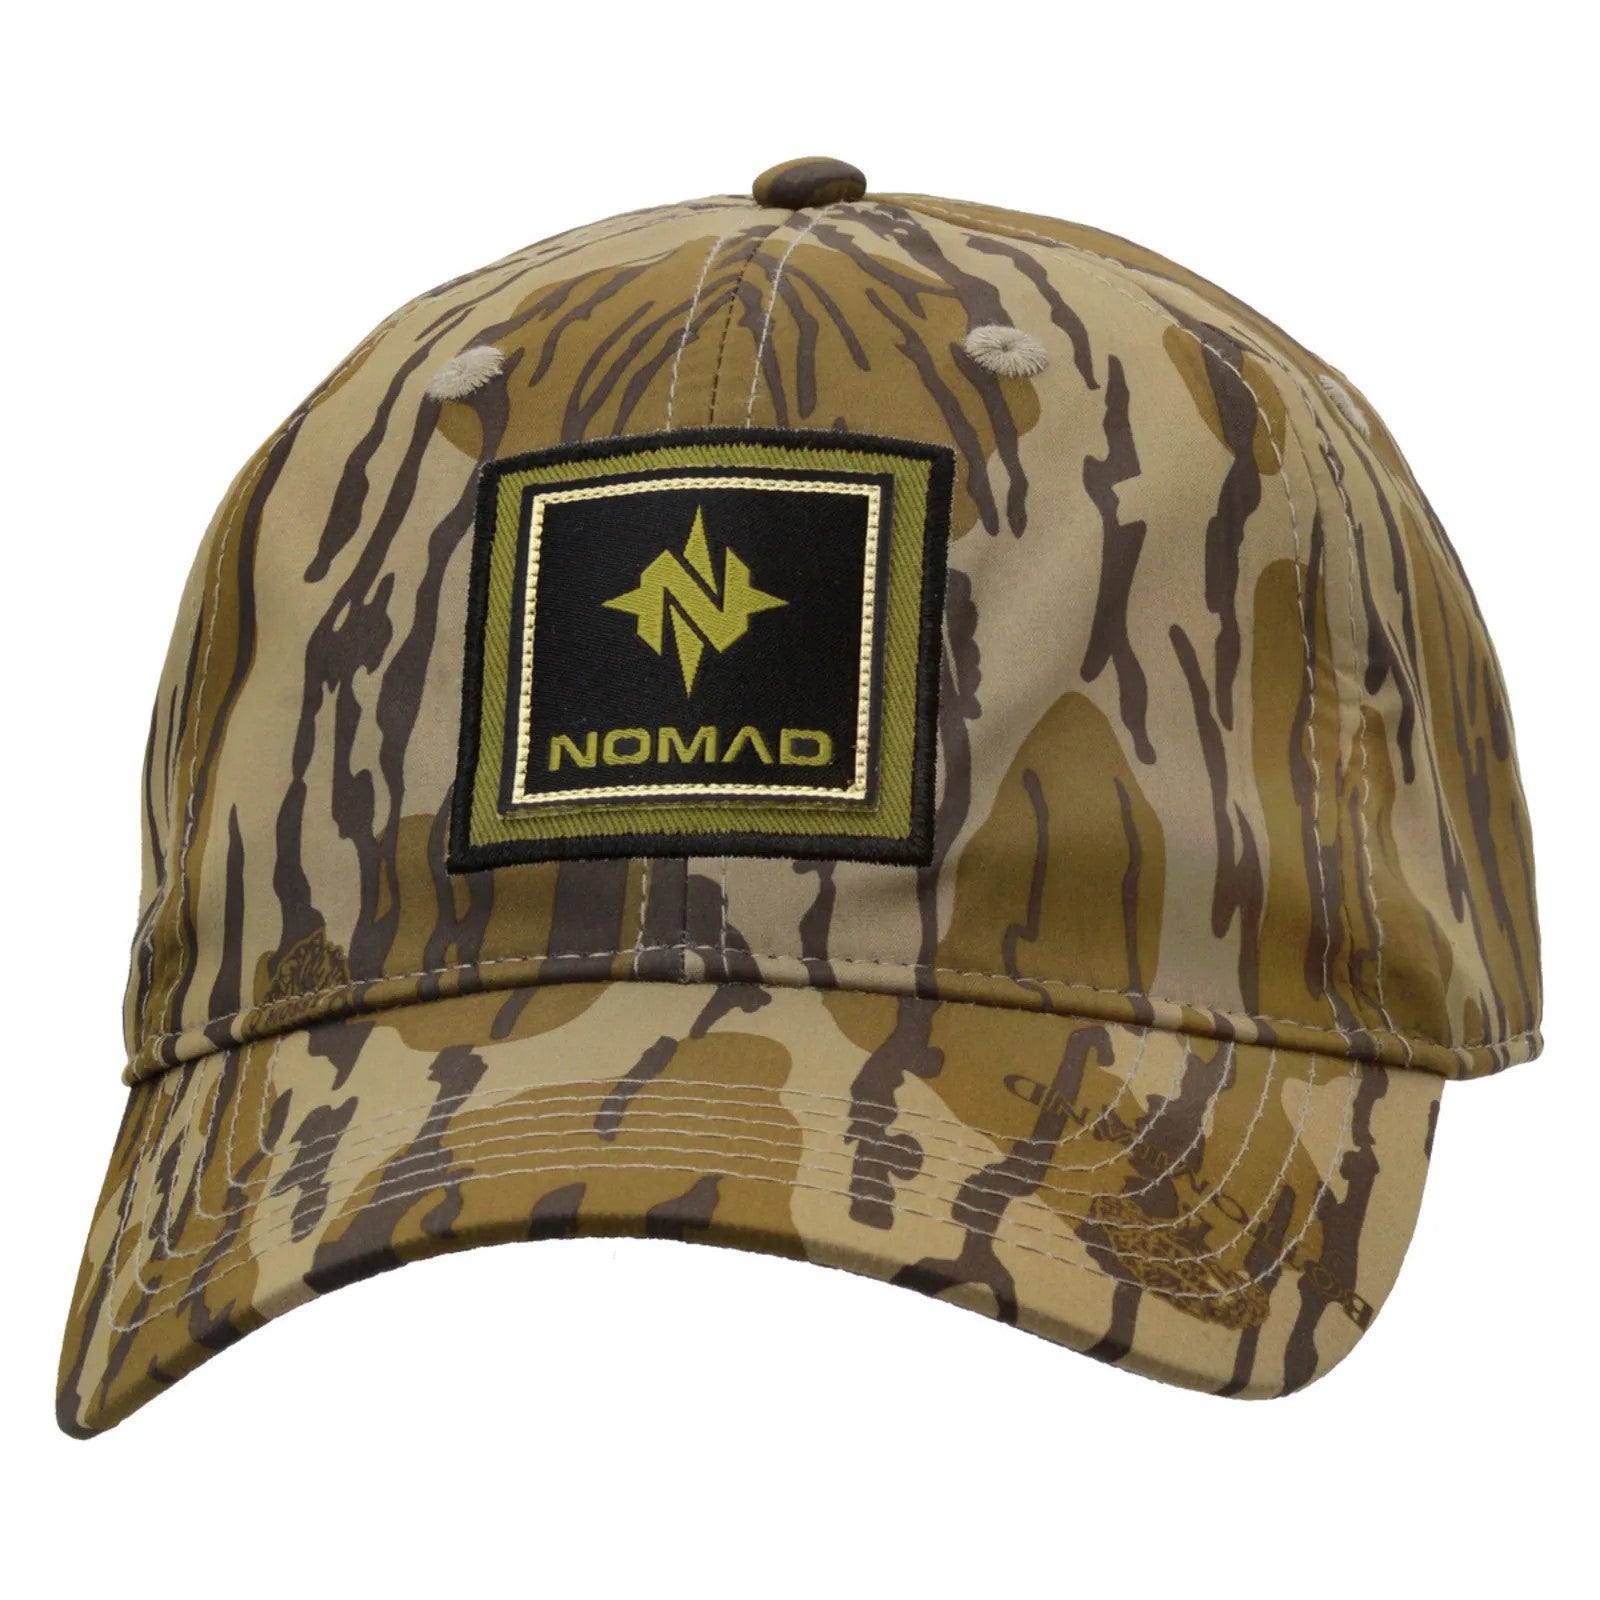 Nomad Woven Patch Cap – The Mossy Oak Store